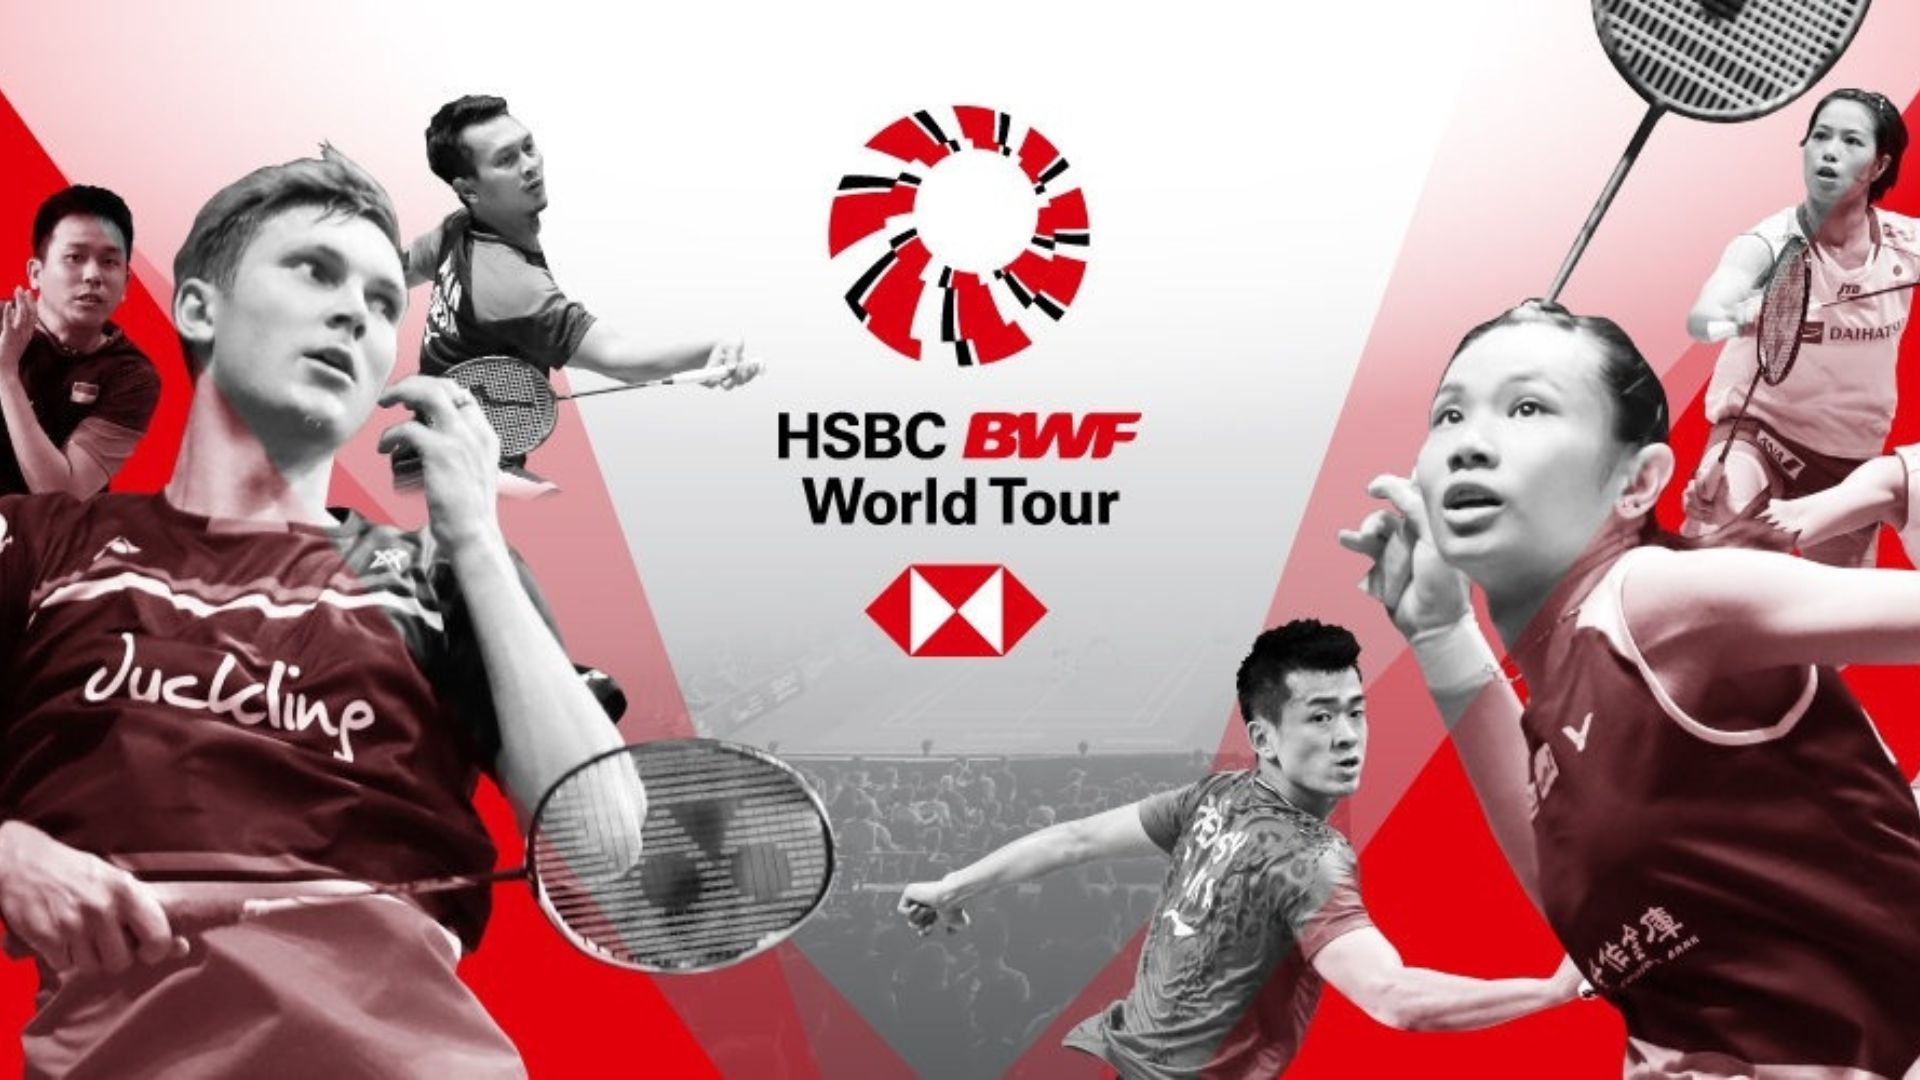 BWF World Tour Finals 2022 relocated from China to Bangkok due to pandemic